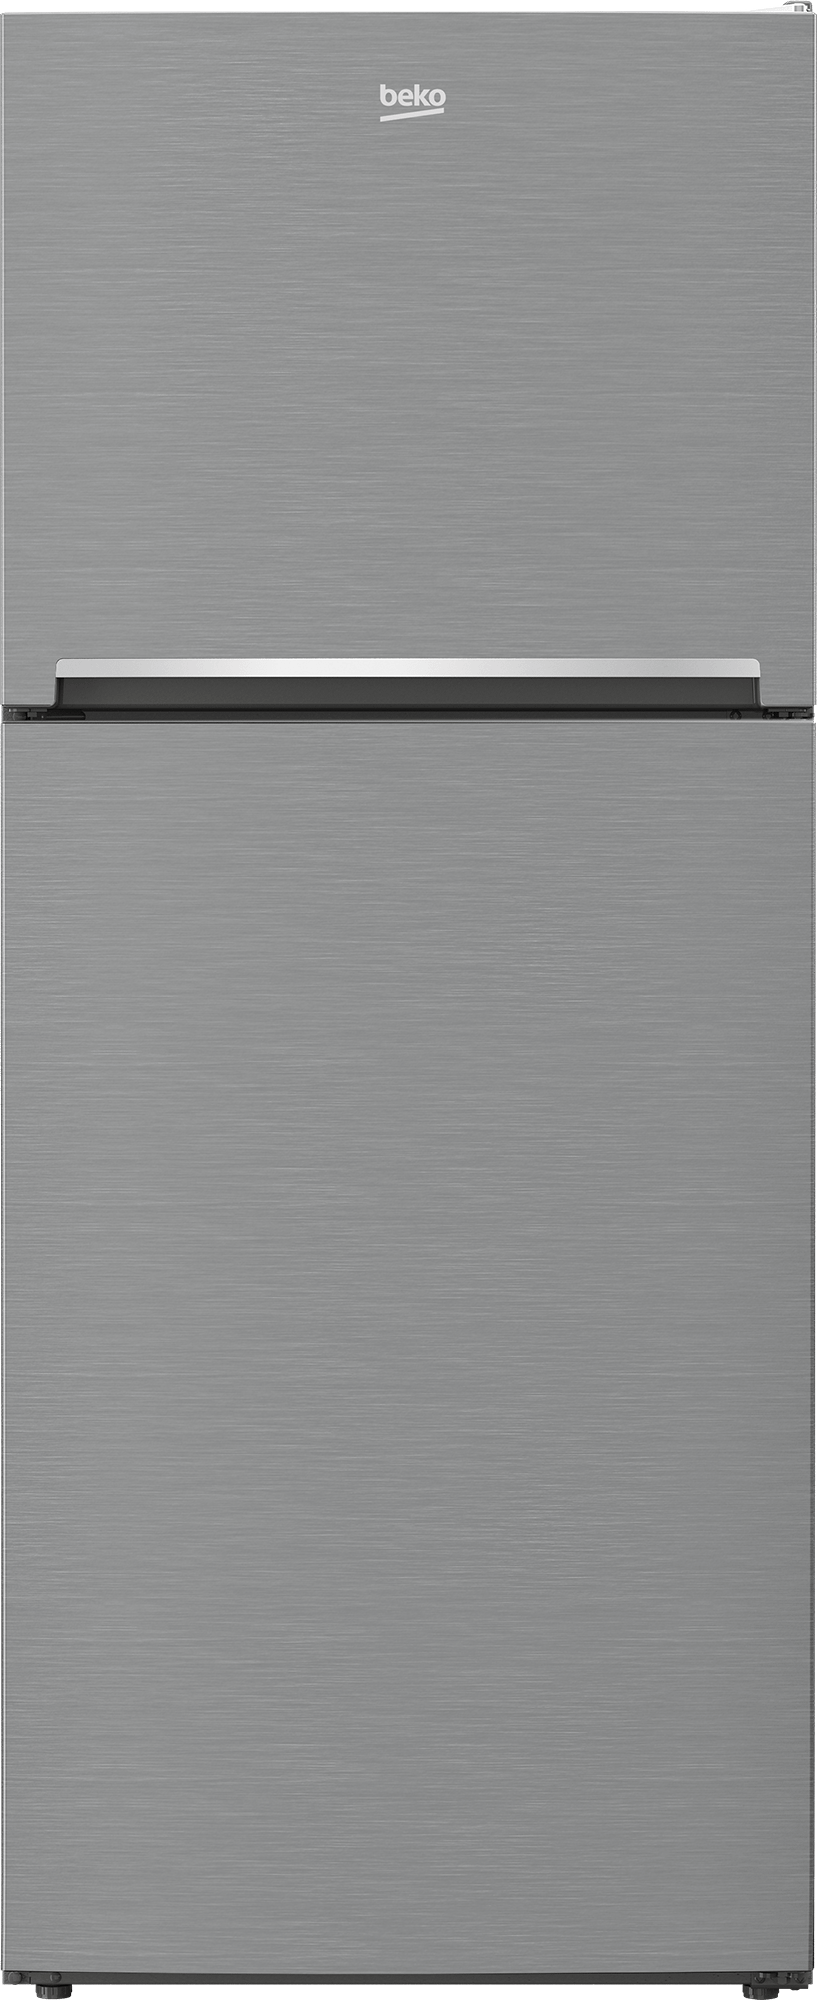 Beko 28" Freezer Top Stainless Steel Refrigerator with Auto Ice Maker